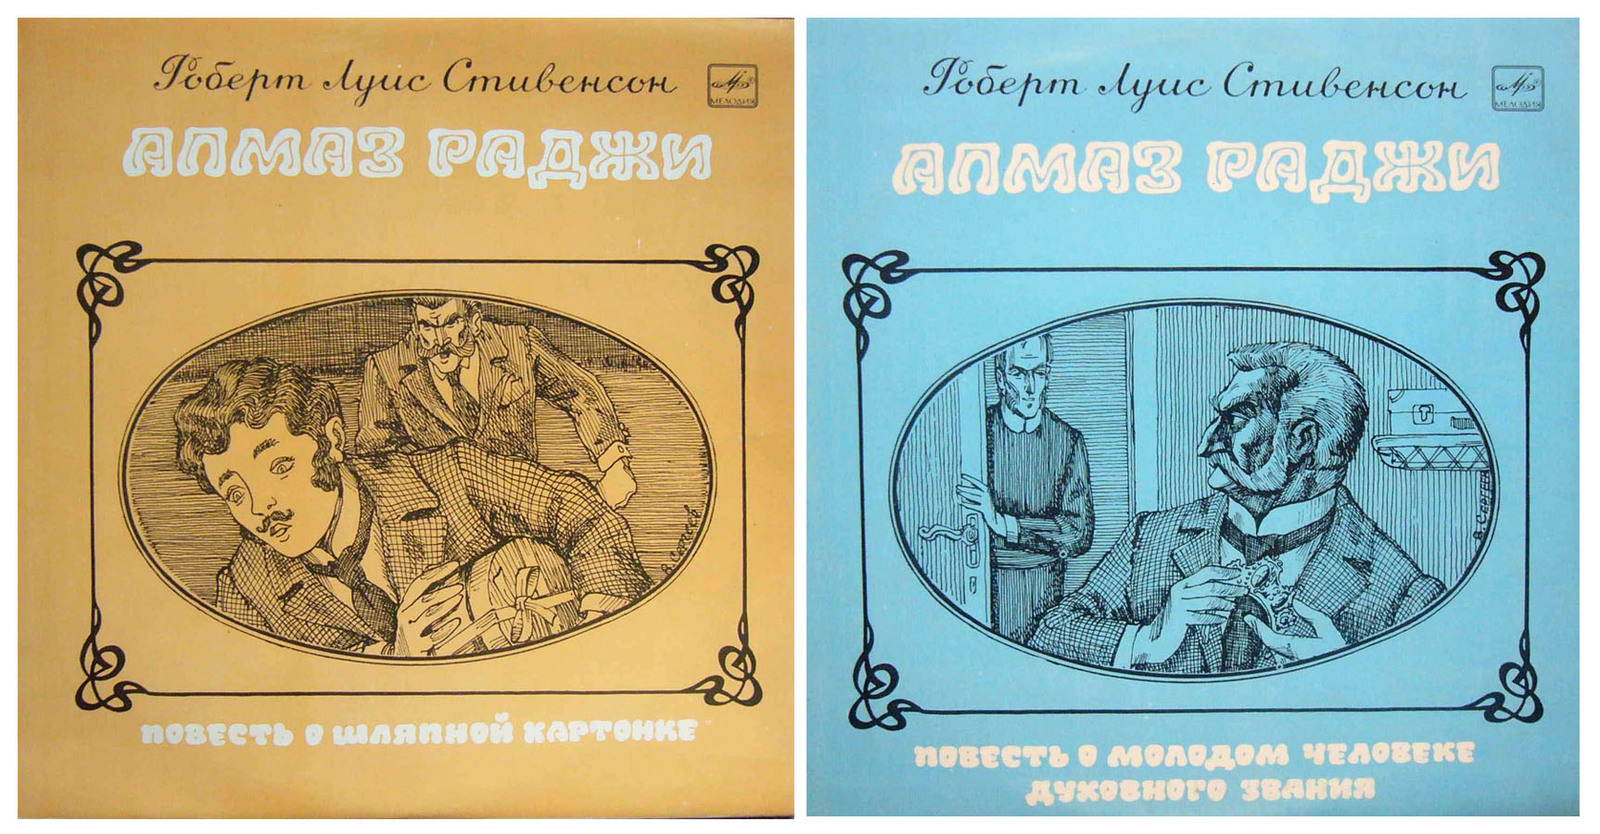 One of my fond memories of my youth... - Audiobooks, Play, the USSR, , Robert Louis Stevenson